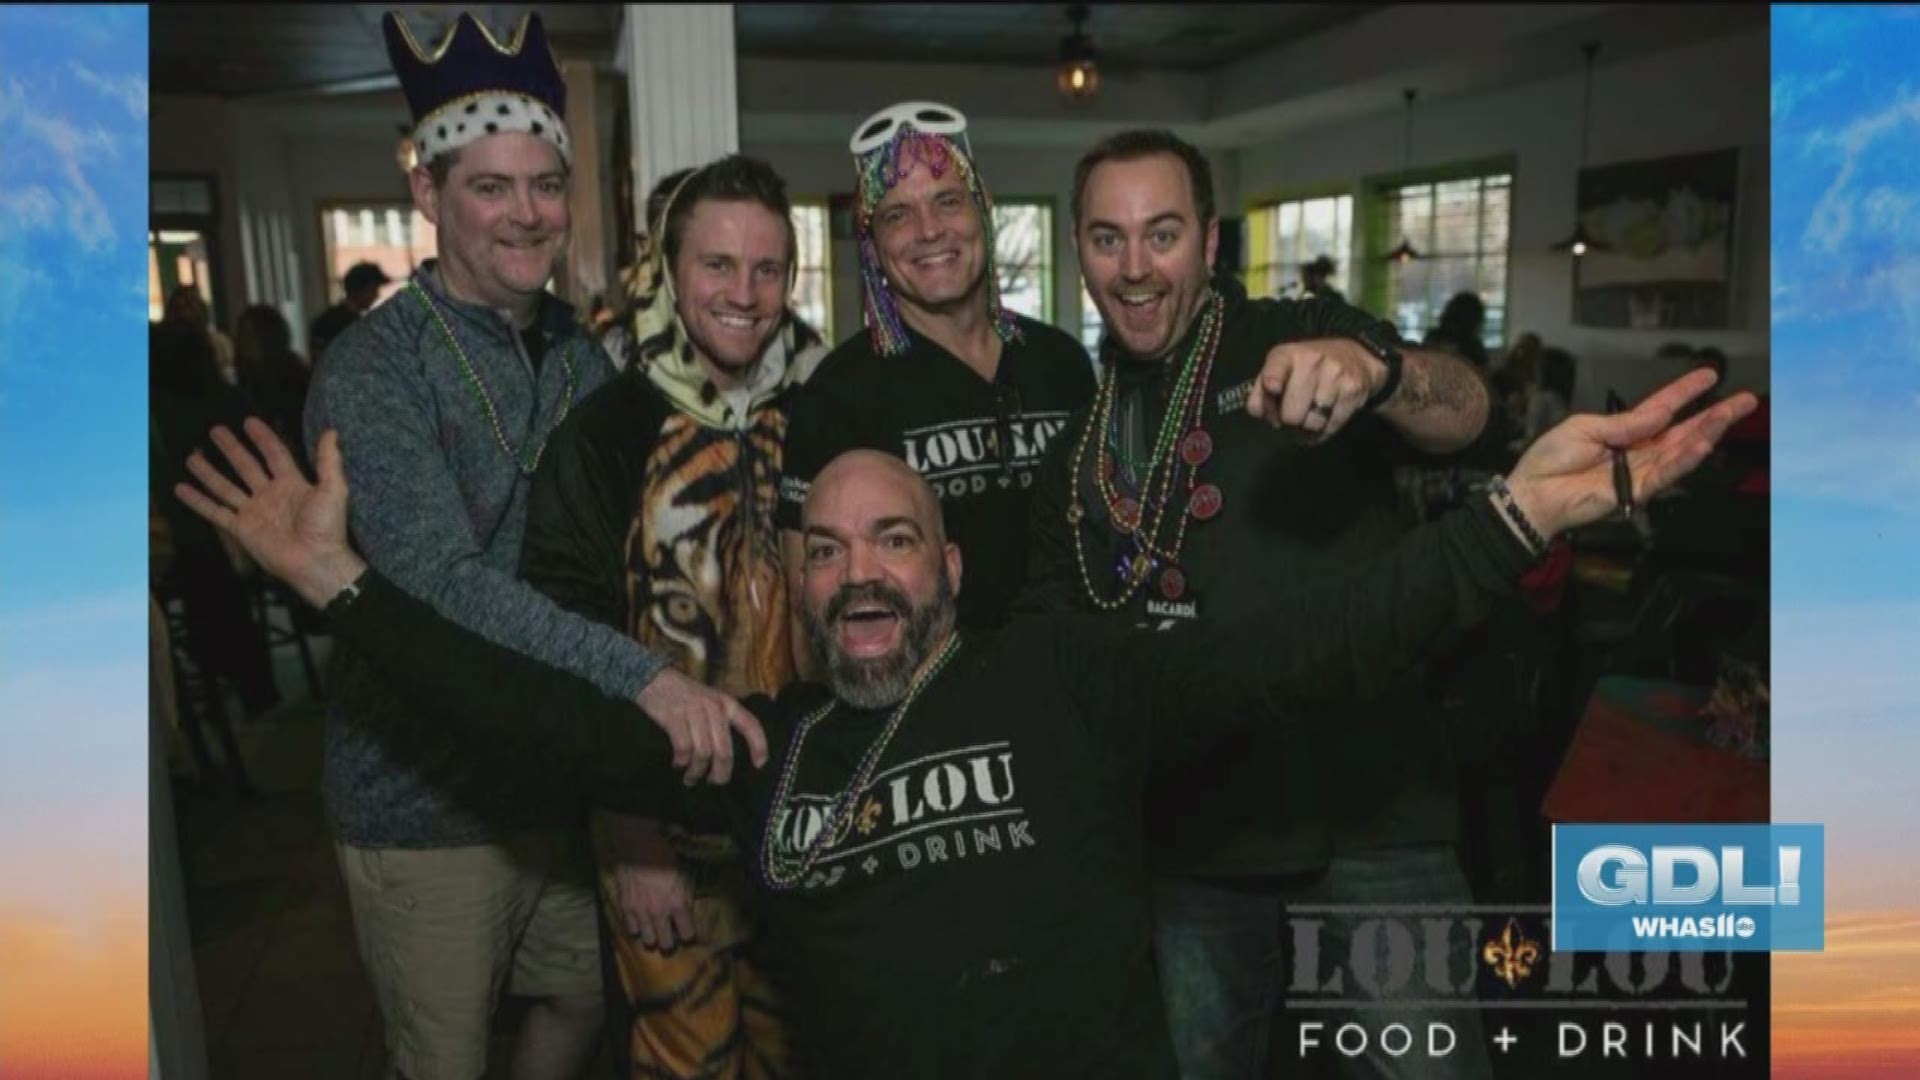 Mardi Gras will be celebrated all day on Tuesday, March 5, 2019 from 11 AM until 11 PM at Lou Lou Food and Drink, which is located at 108 Sears Avenue in Louisville, KY.